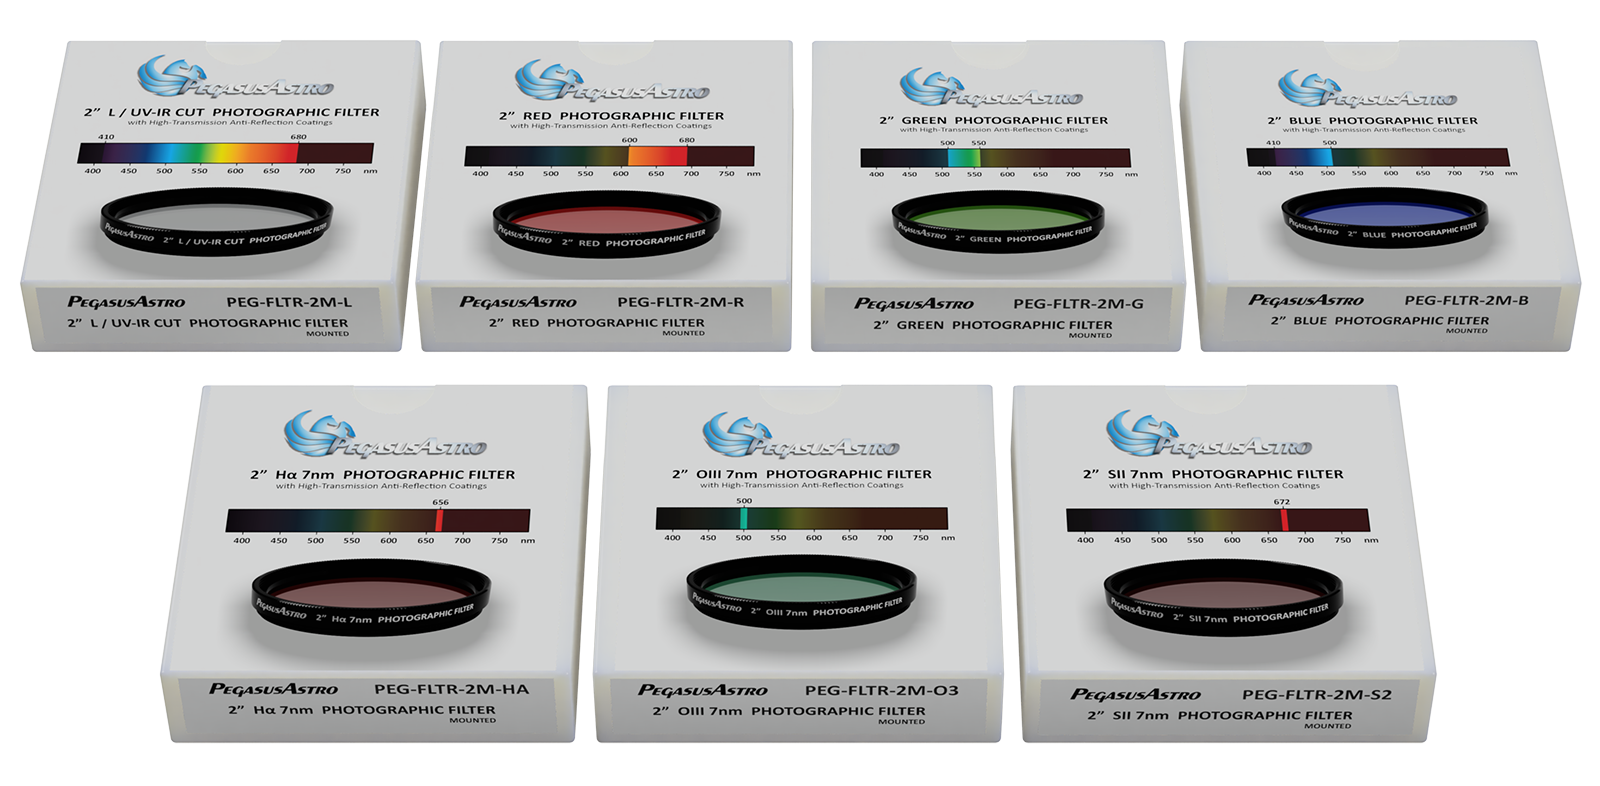 Pegasus Astro Photographic Filter - Red 2" Mounted Filter